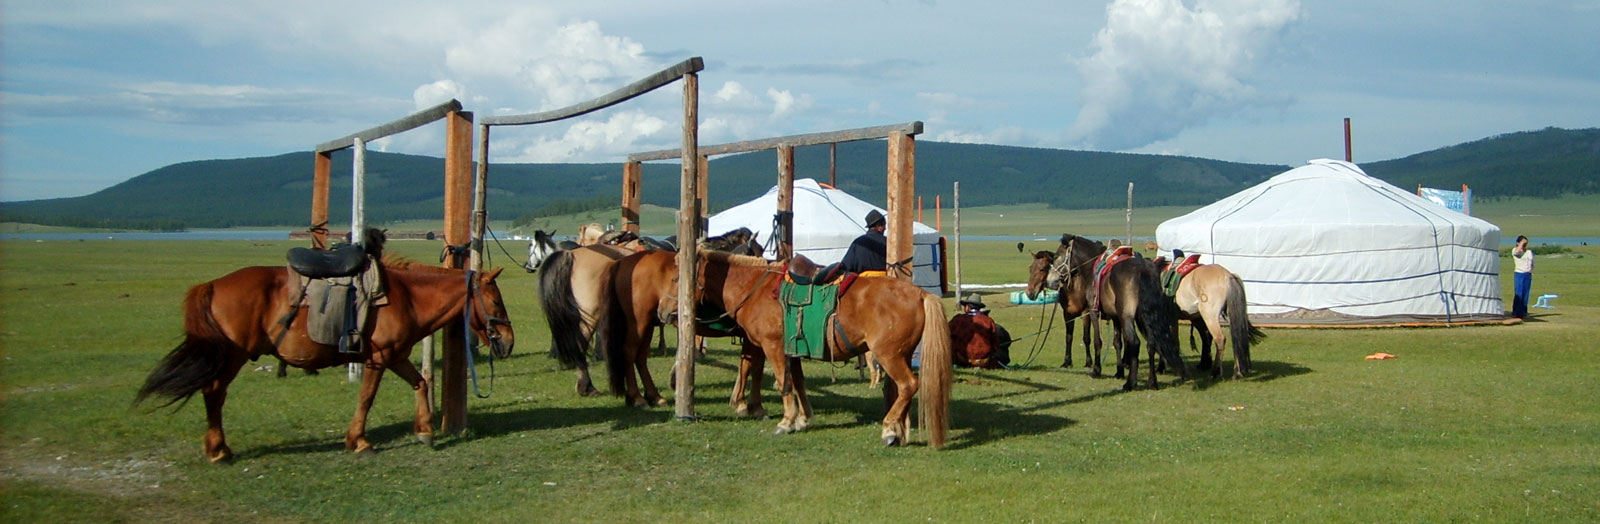 Chevaux Tethered en Mongolie